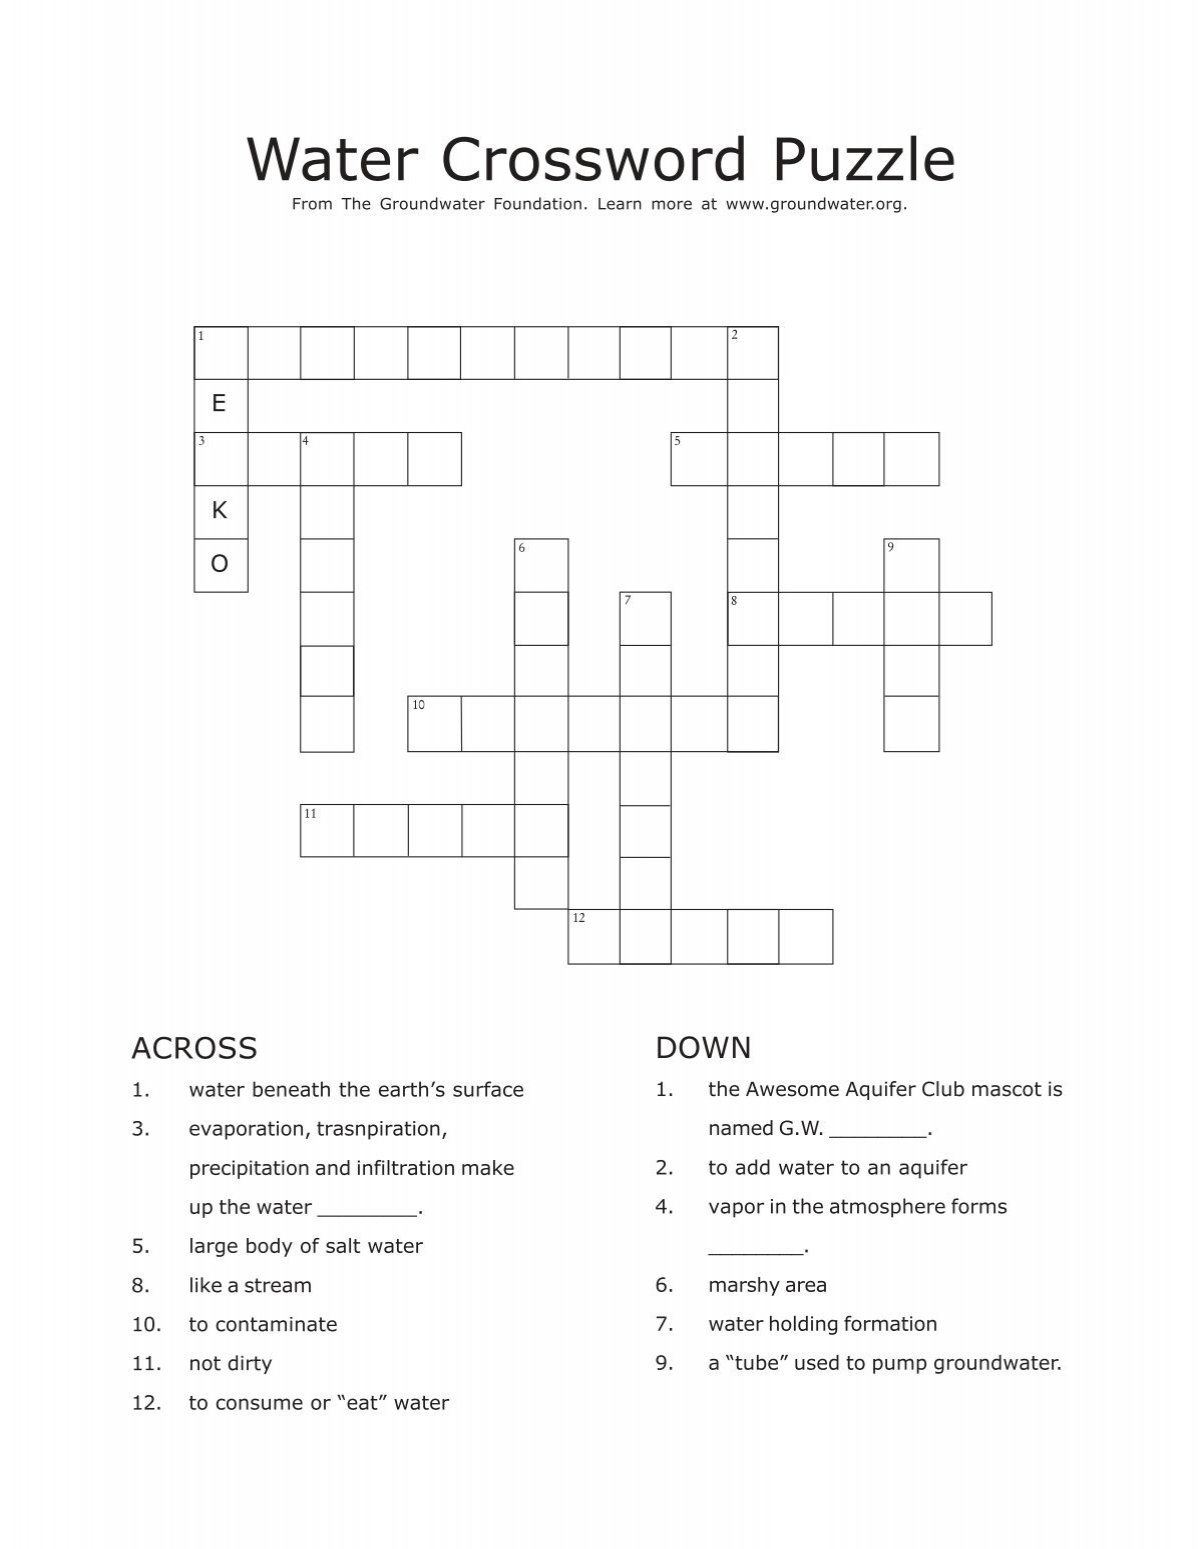 Water Crossword groundwater org The Groundwater Foundation